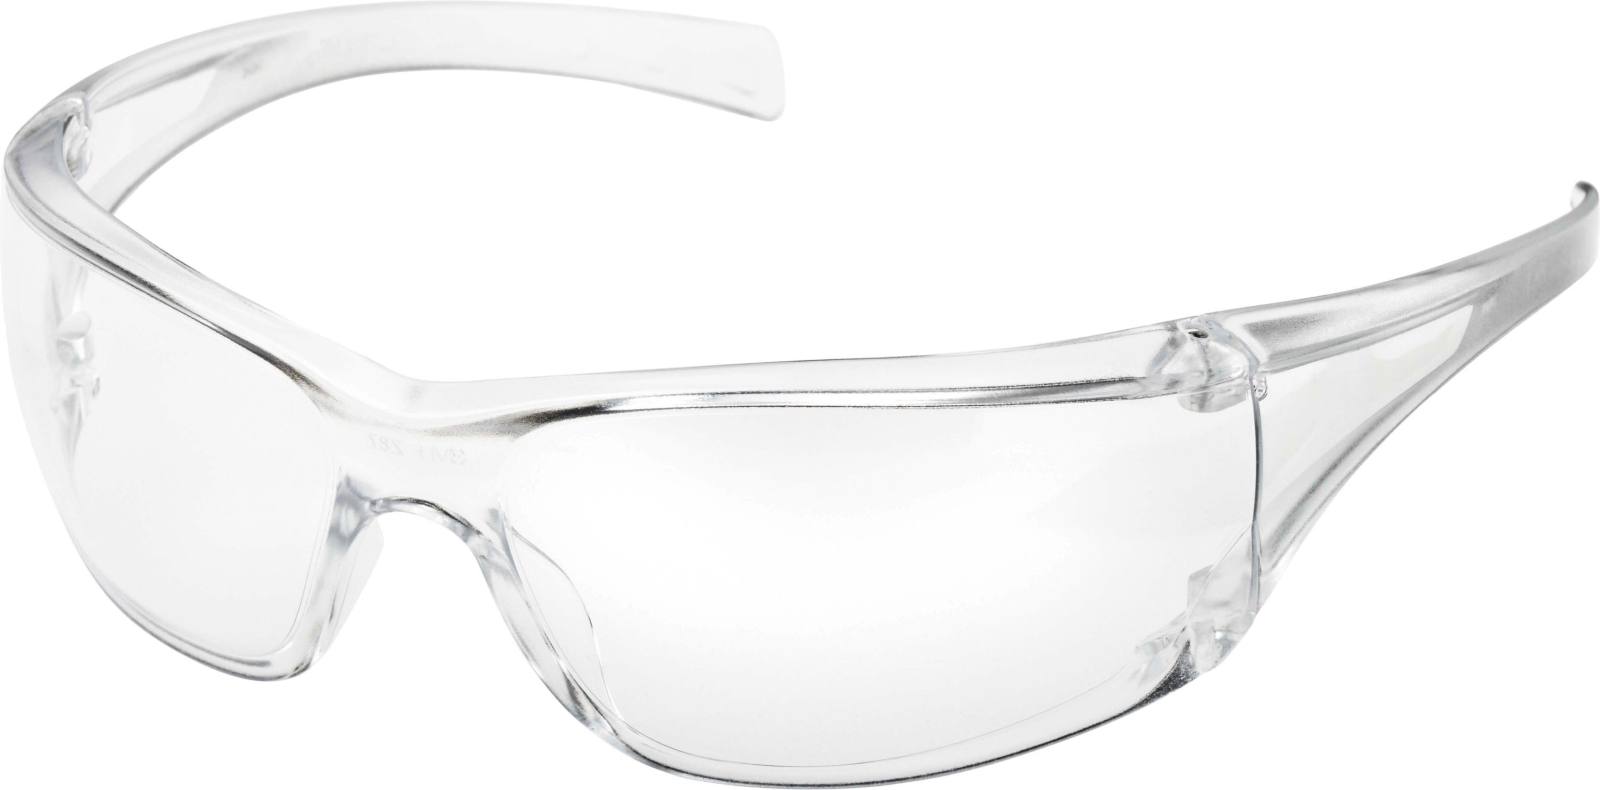 3M Virtua safety spectacles with anti-scratch coating, transparent lenses, 71500-00001